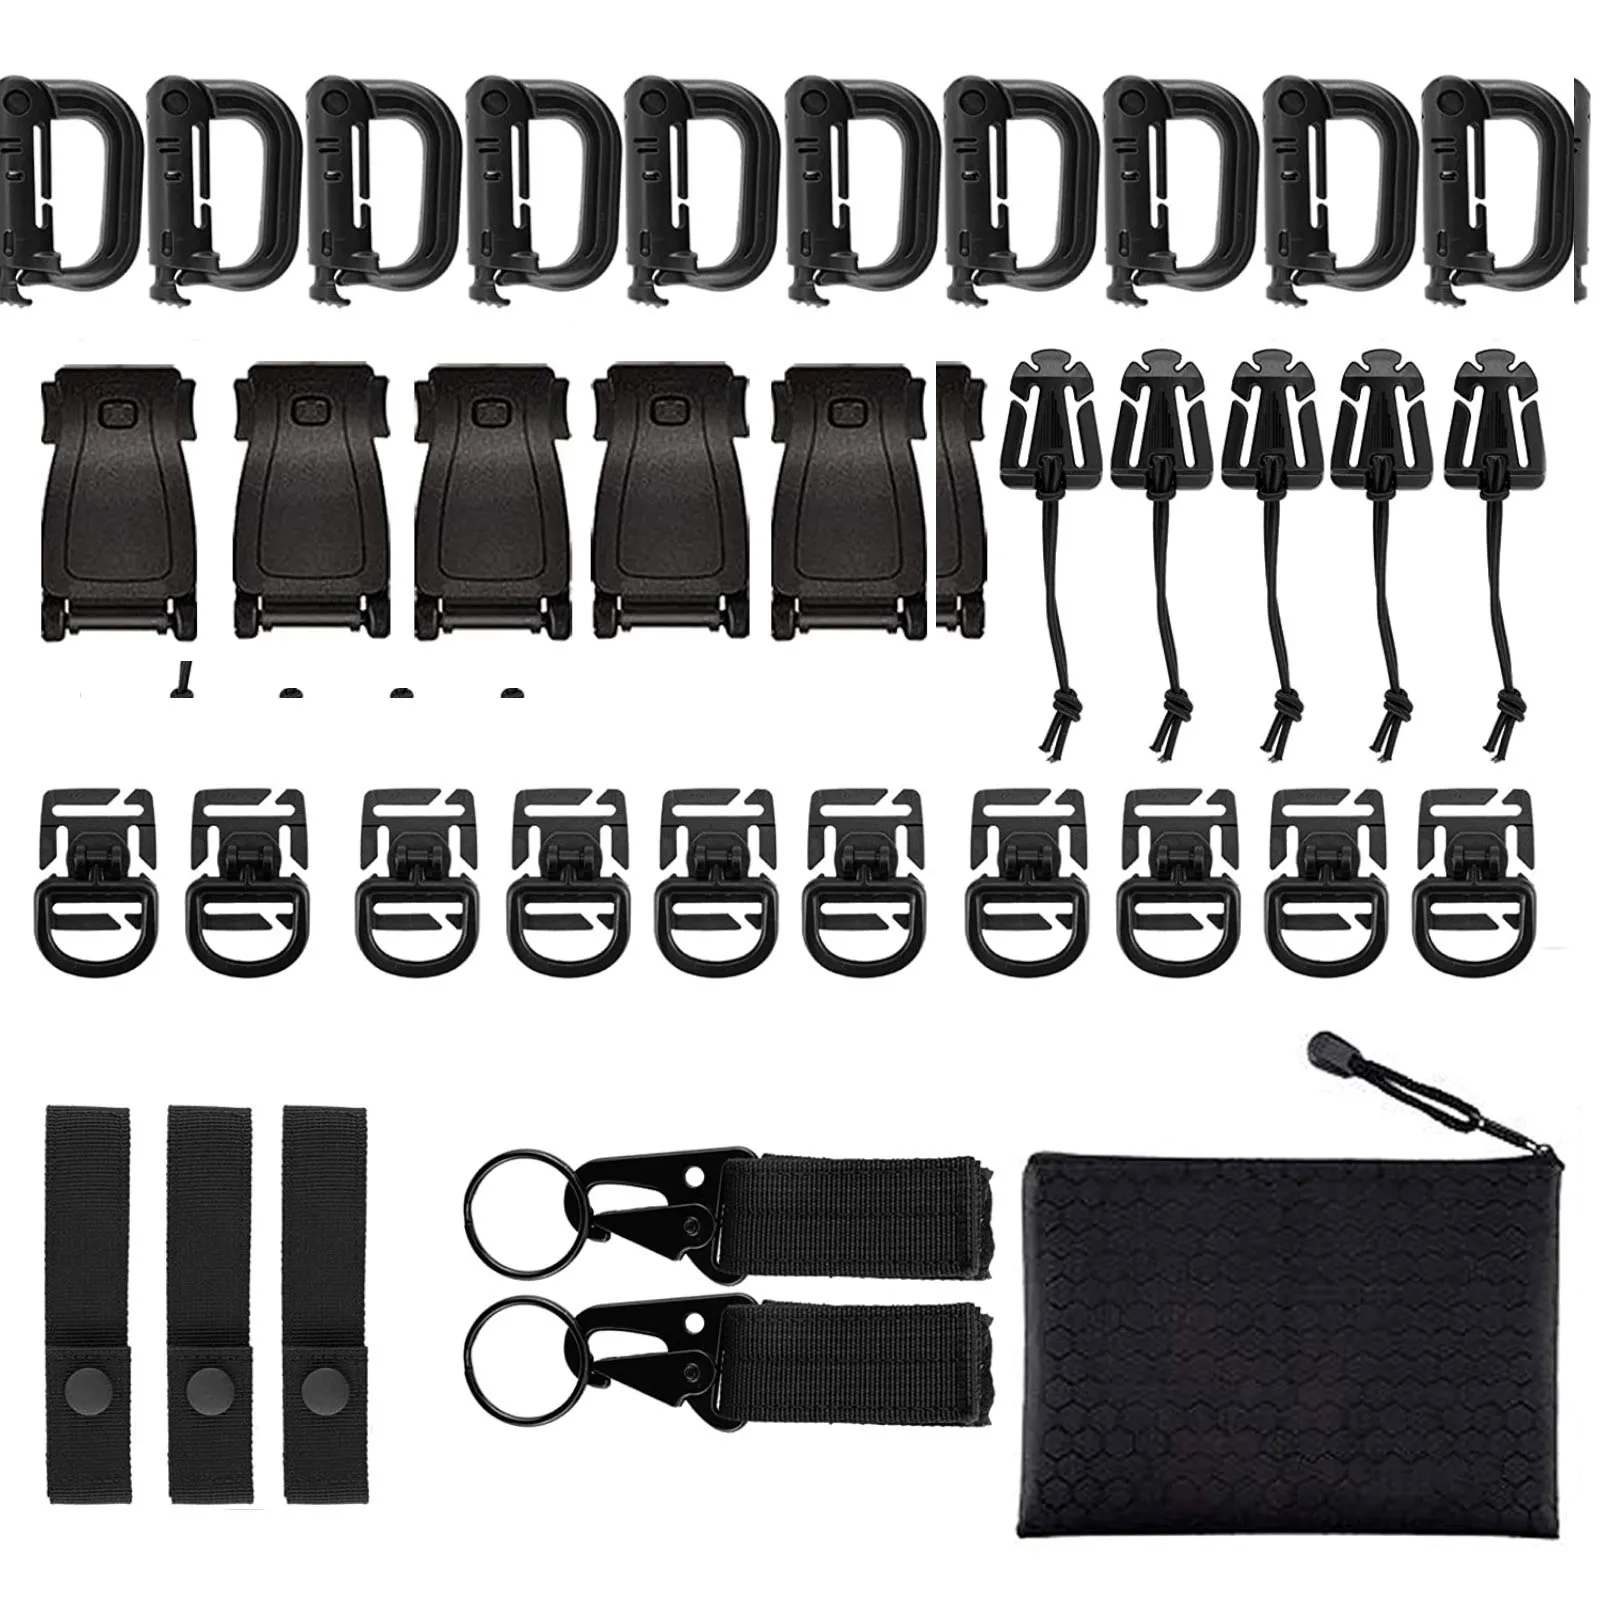 

Kit Of 35 Molle Attachments Set Molle Carabiner Clips And Straps For Webbing With Molle Pouches D-Ring Grimloc Locking Gear Clip